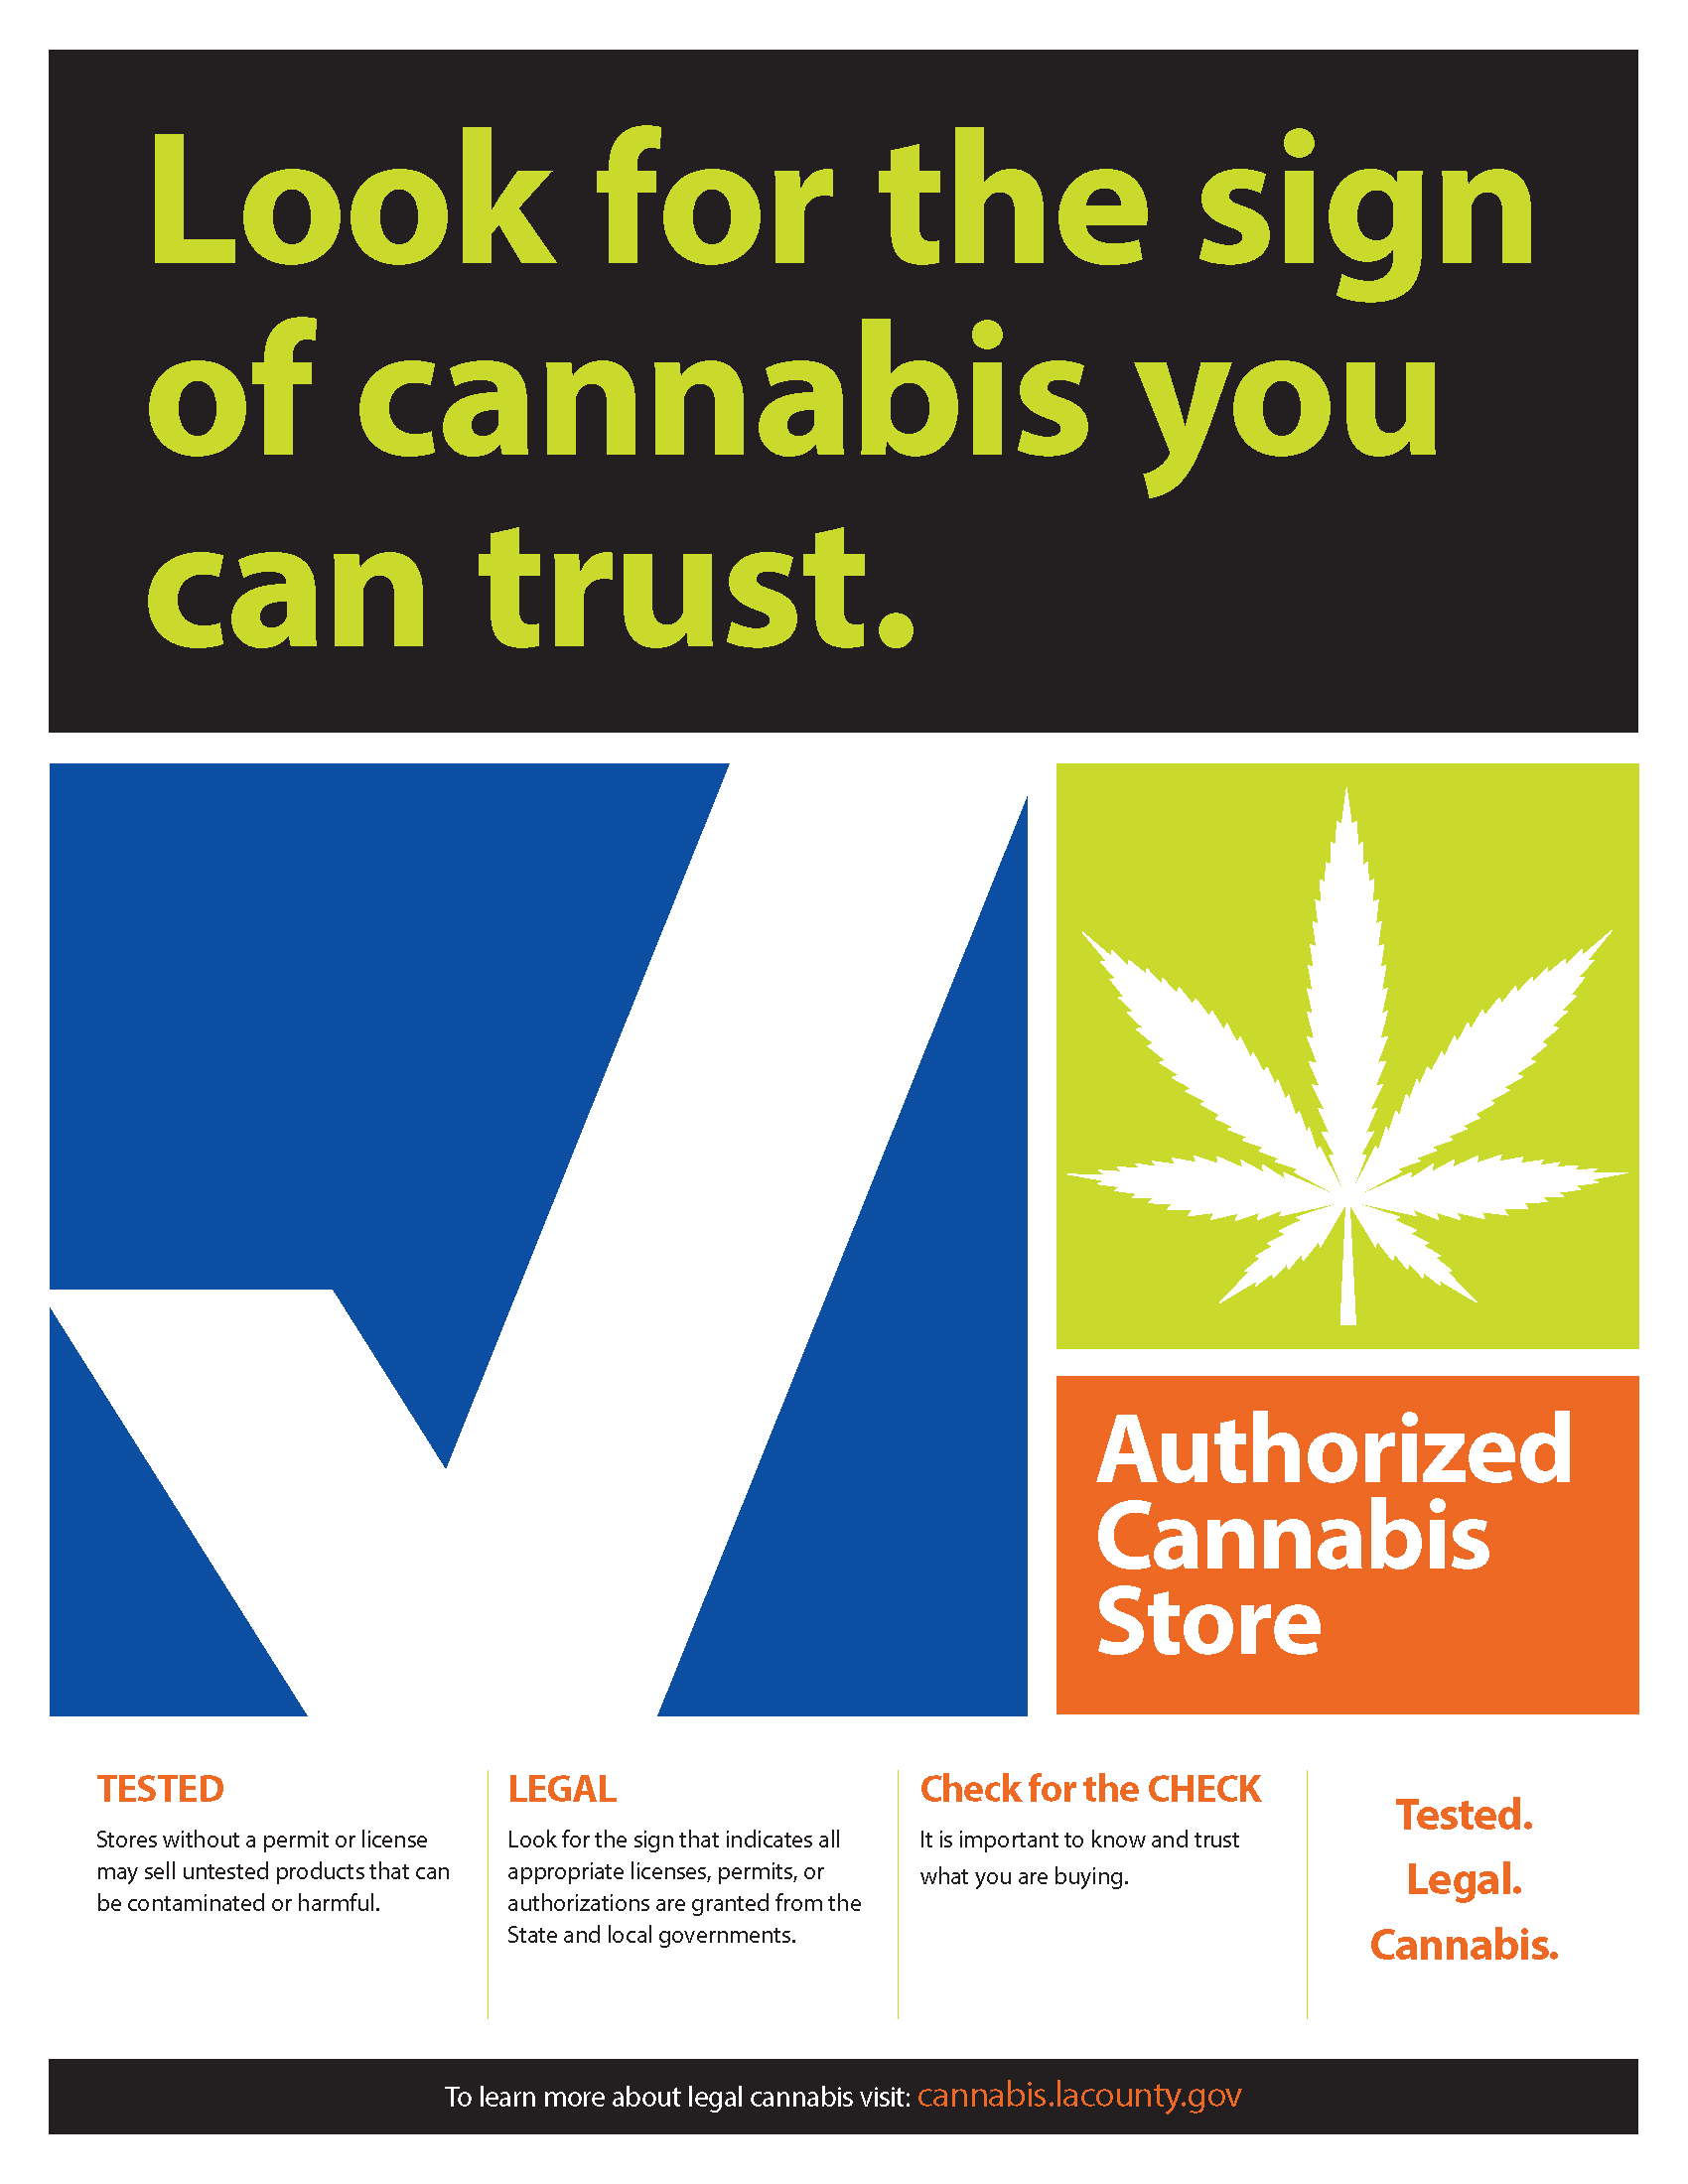 Look for the sign of cannabis you can trust. With a white check on a blue background that indicates an Authorized Cannabis Store